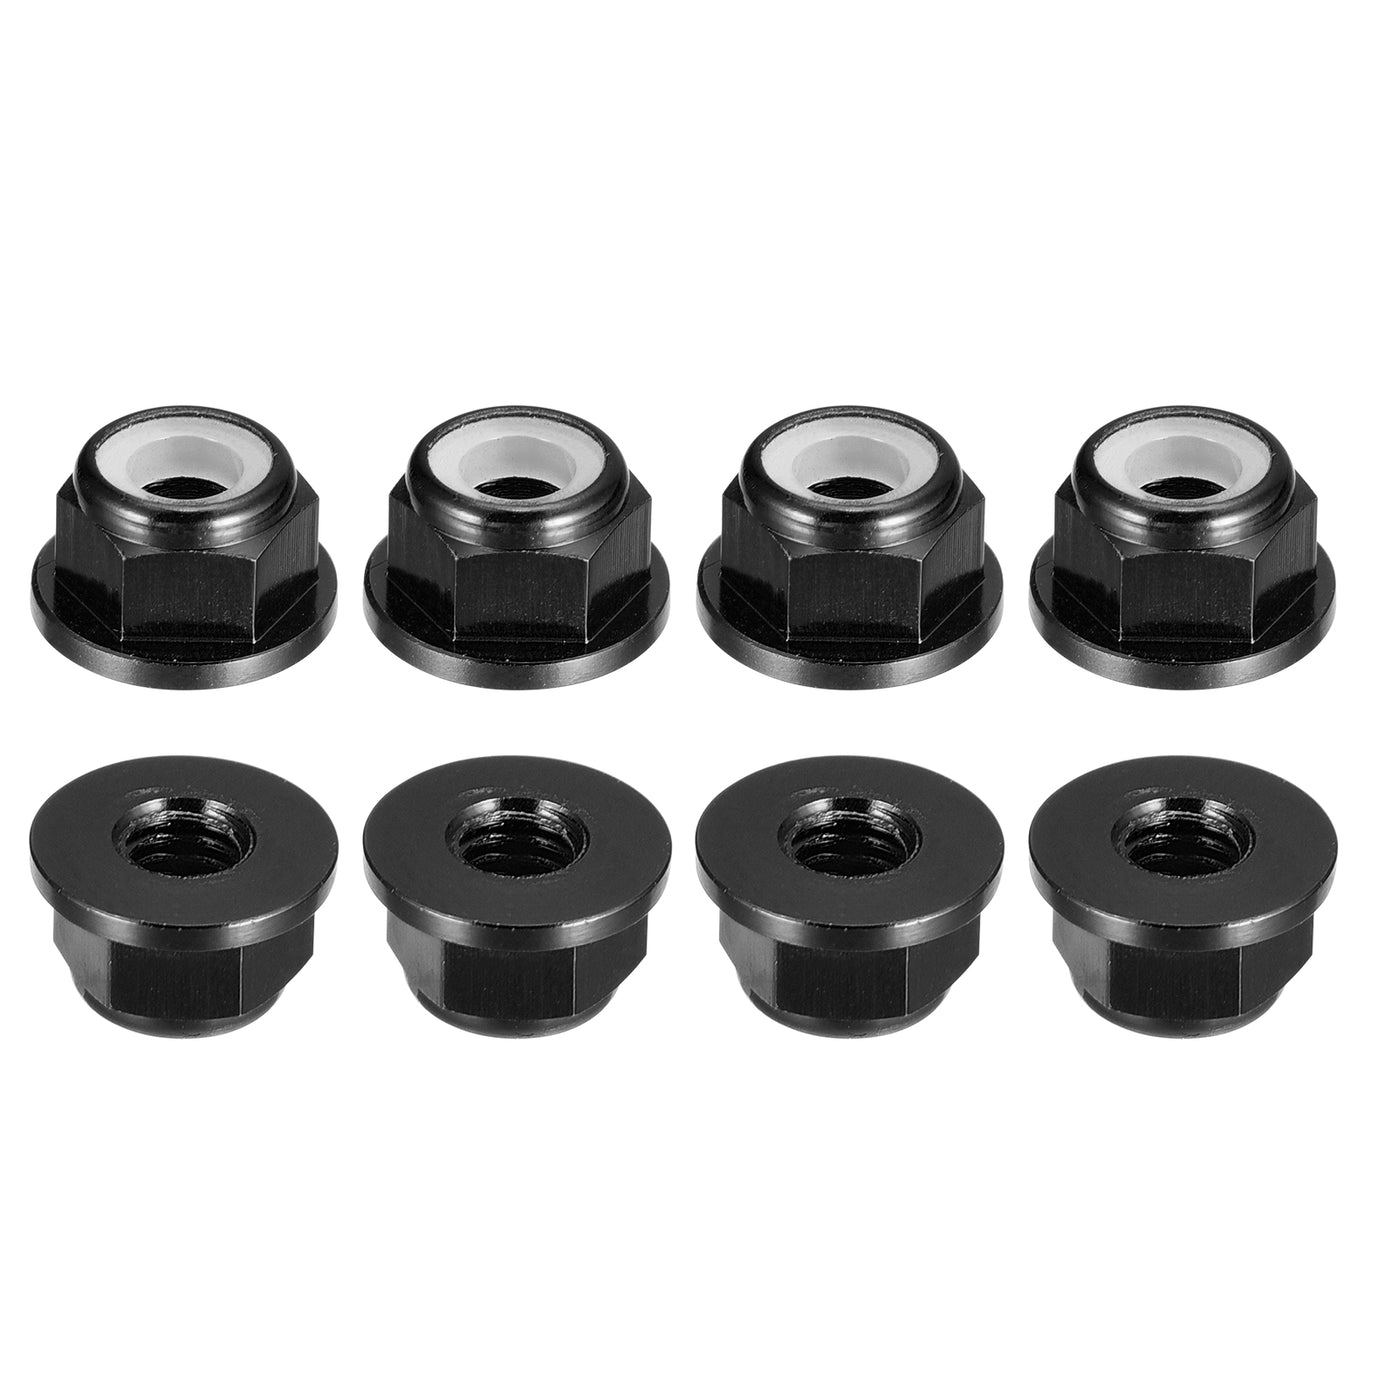 uxcell Uxcell Nylon Insert Hex Lock Nuts, 8pcs - M5 x 0.8mm Aluminum Alloy Self-Locking Nut, Anodizing Flange Lock Nut for Fasteners (Black)